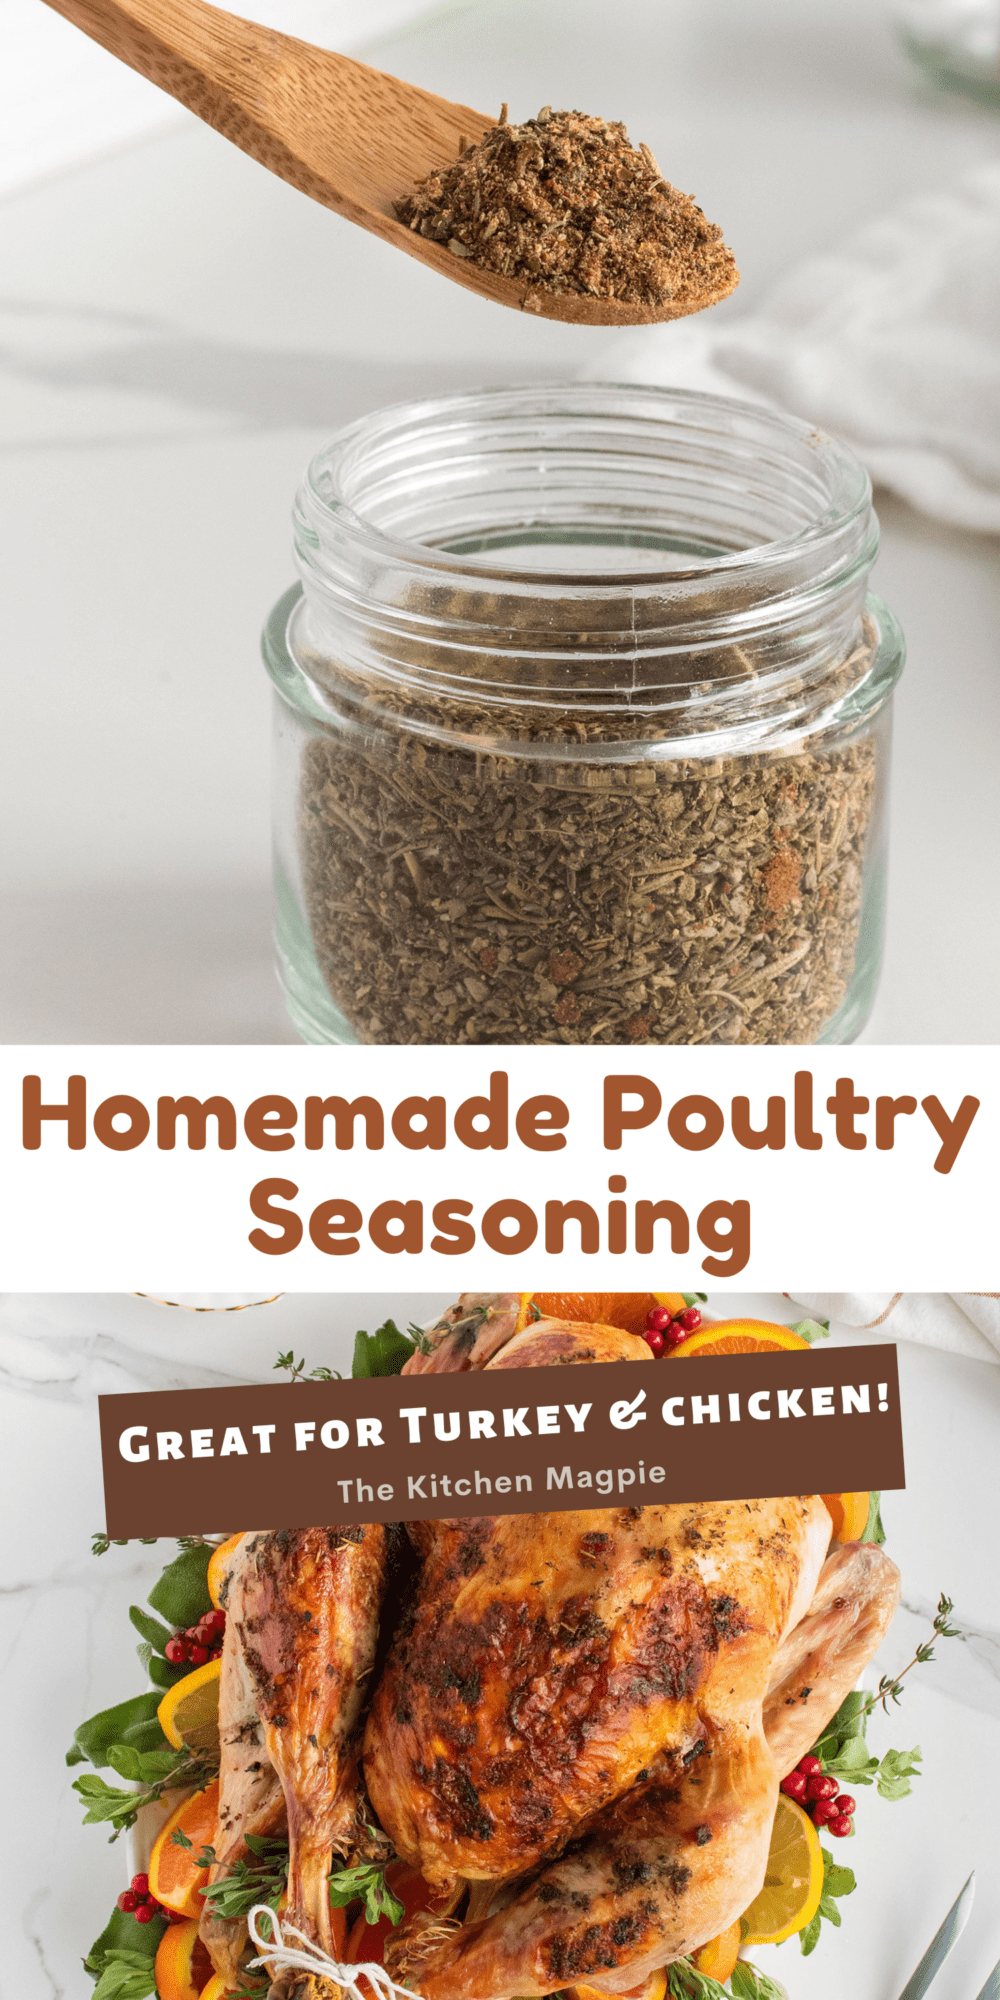 Make your own poultry seasoning at home that's perfect for roast turkey, chicken, homemade turkey stuffing and more! 